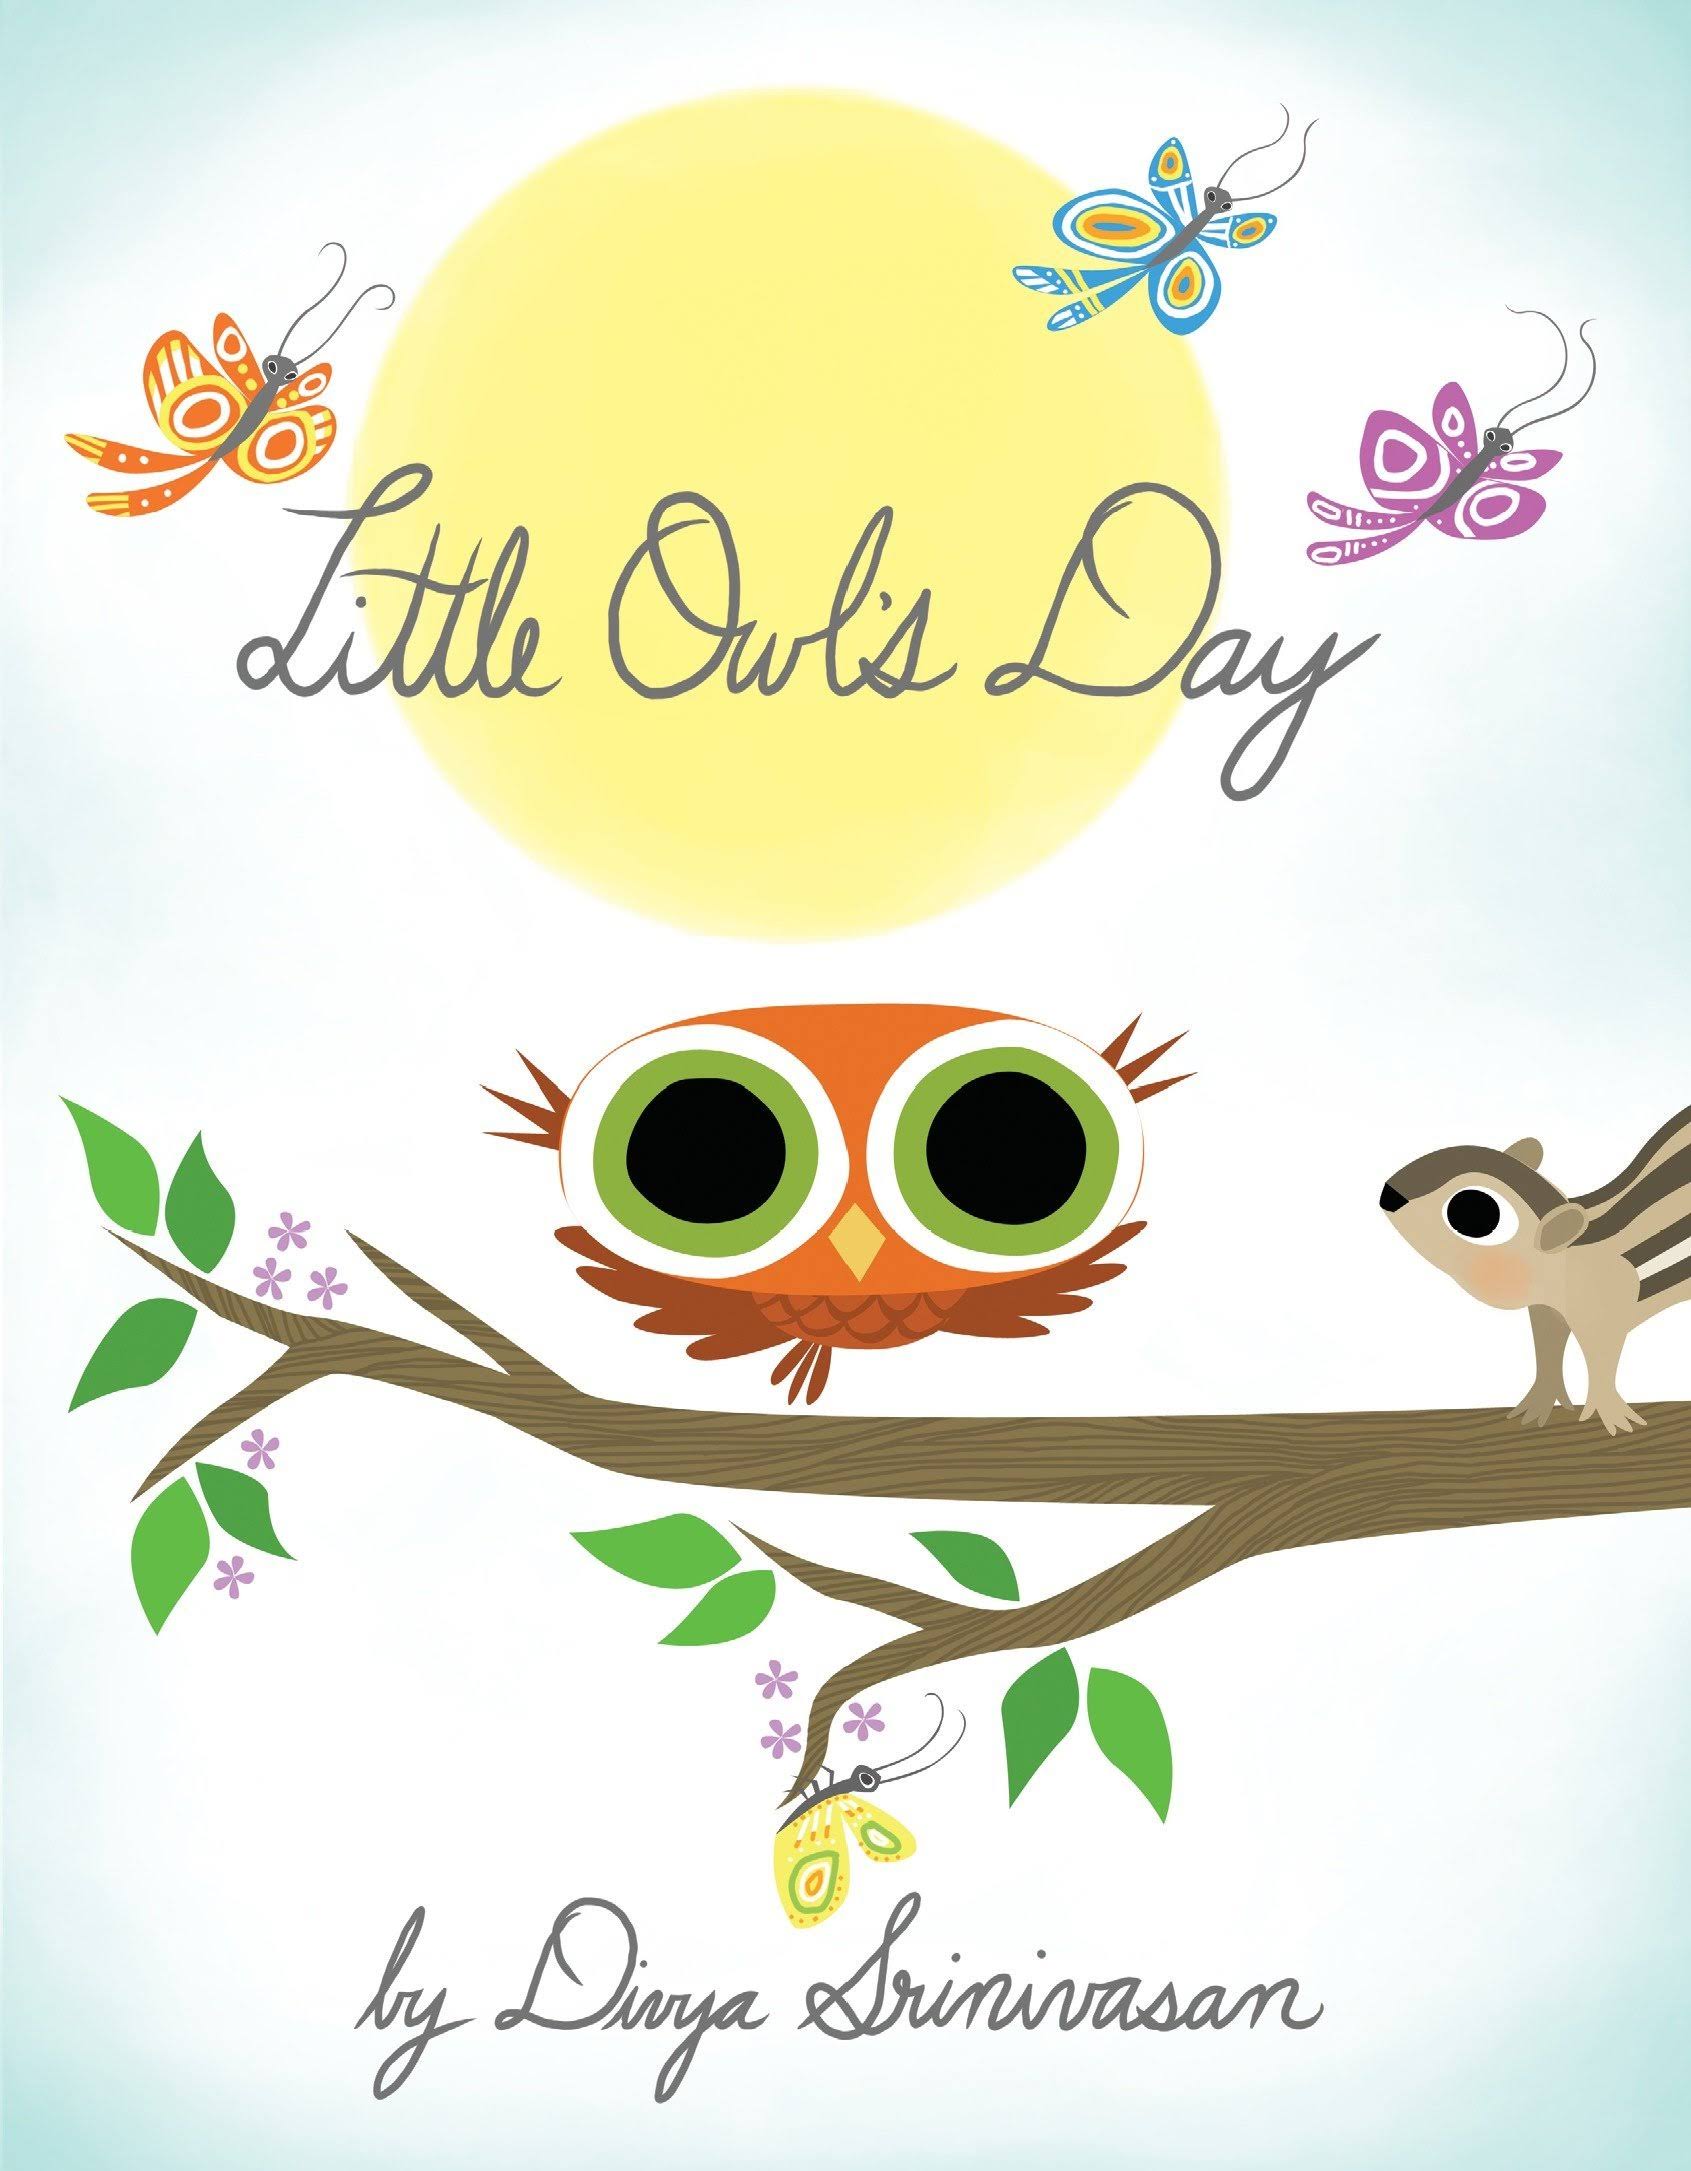 Little Owl's Day [Book]